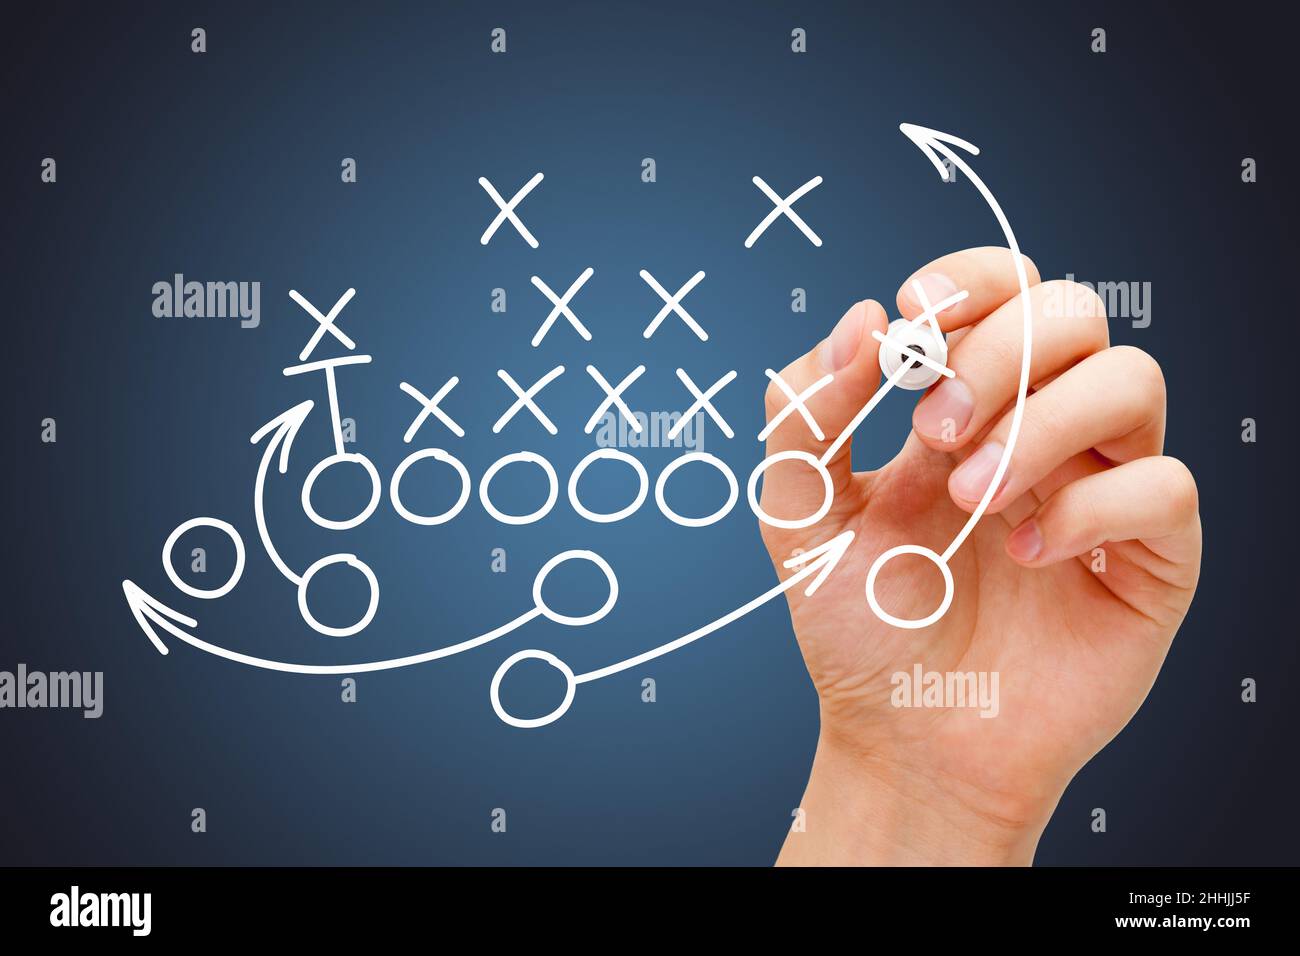 Coach drawing american football or rugby game playbook, strategy and tactics with white marker on blue background. Stock Photo